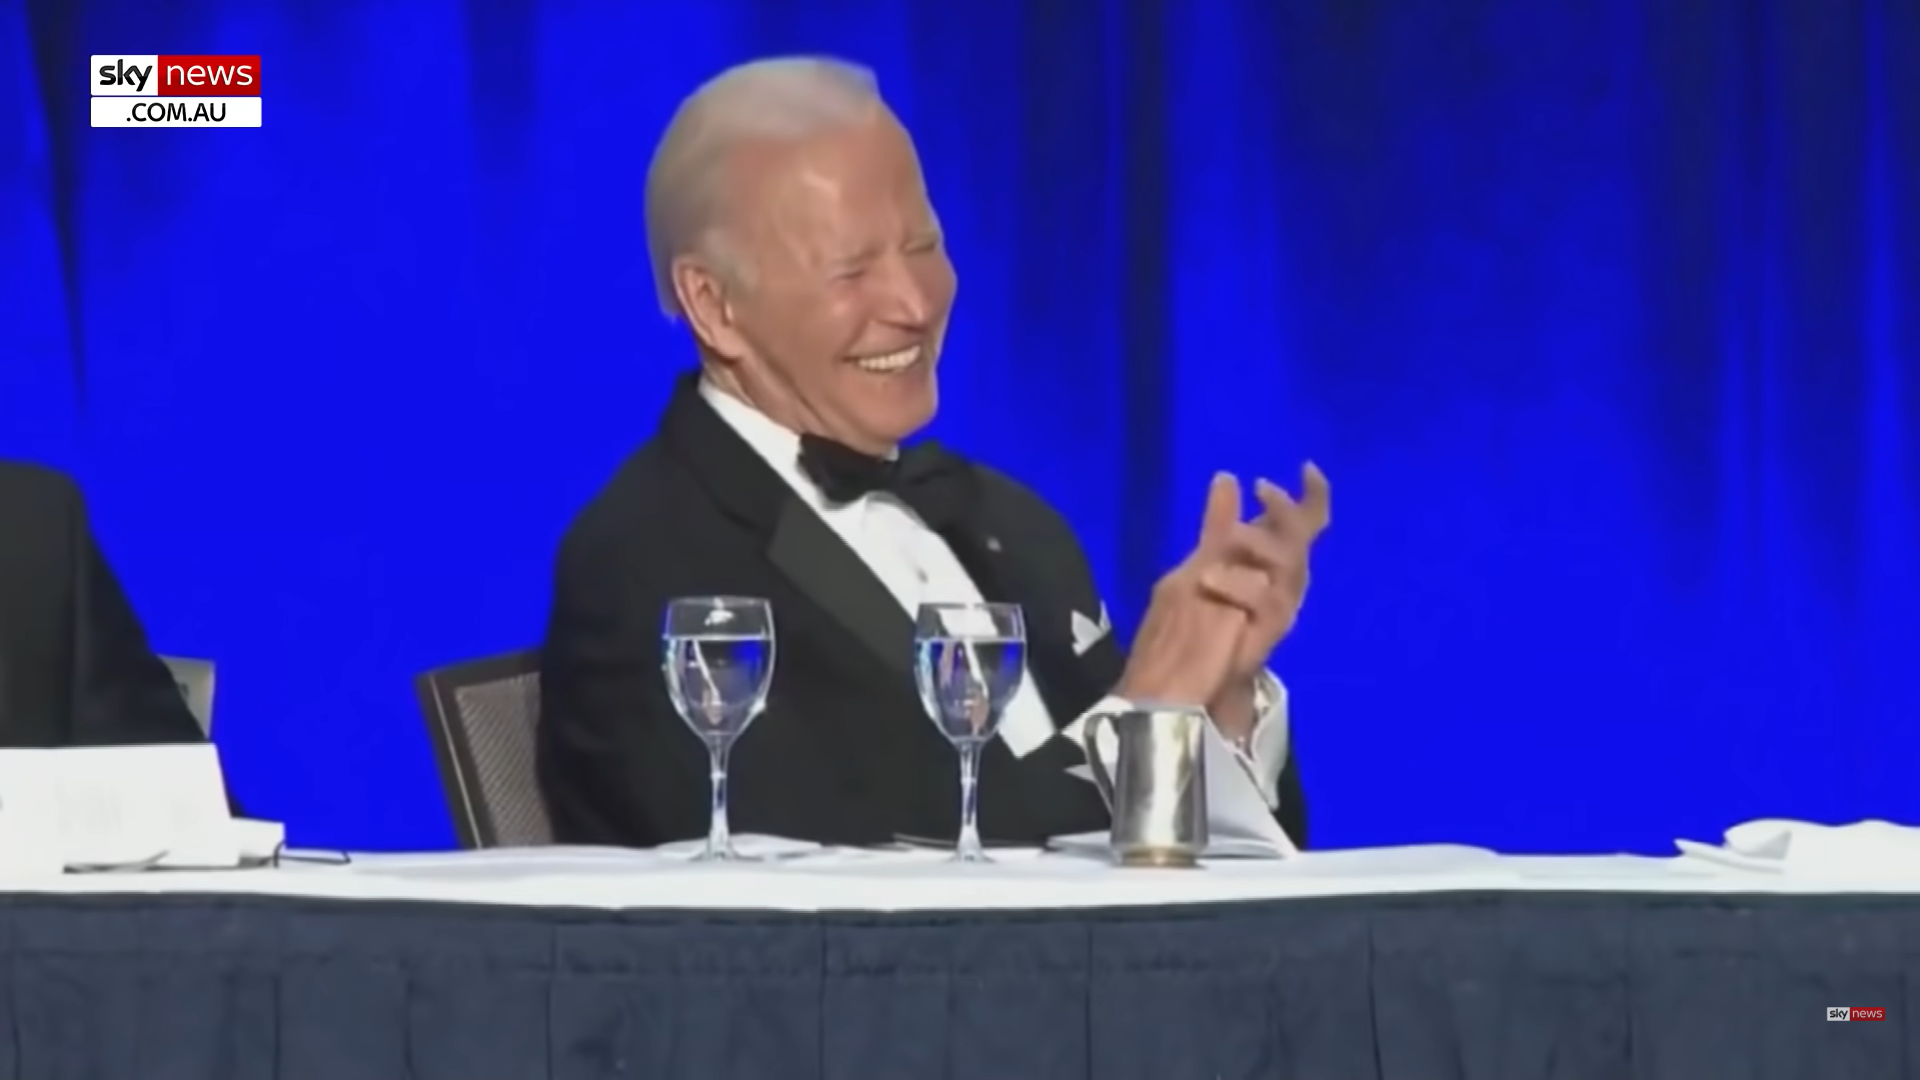 Joe Biden Is Now Creepily Laughing At Inappropriate Times, Just Like Kamala